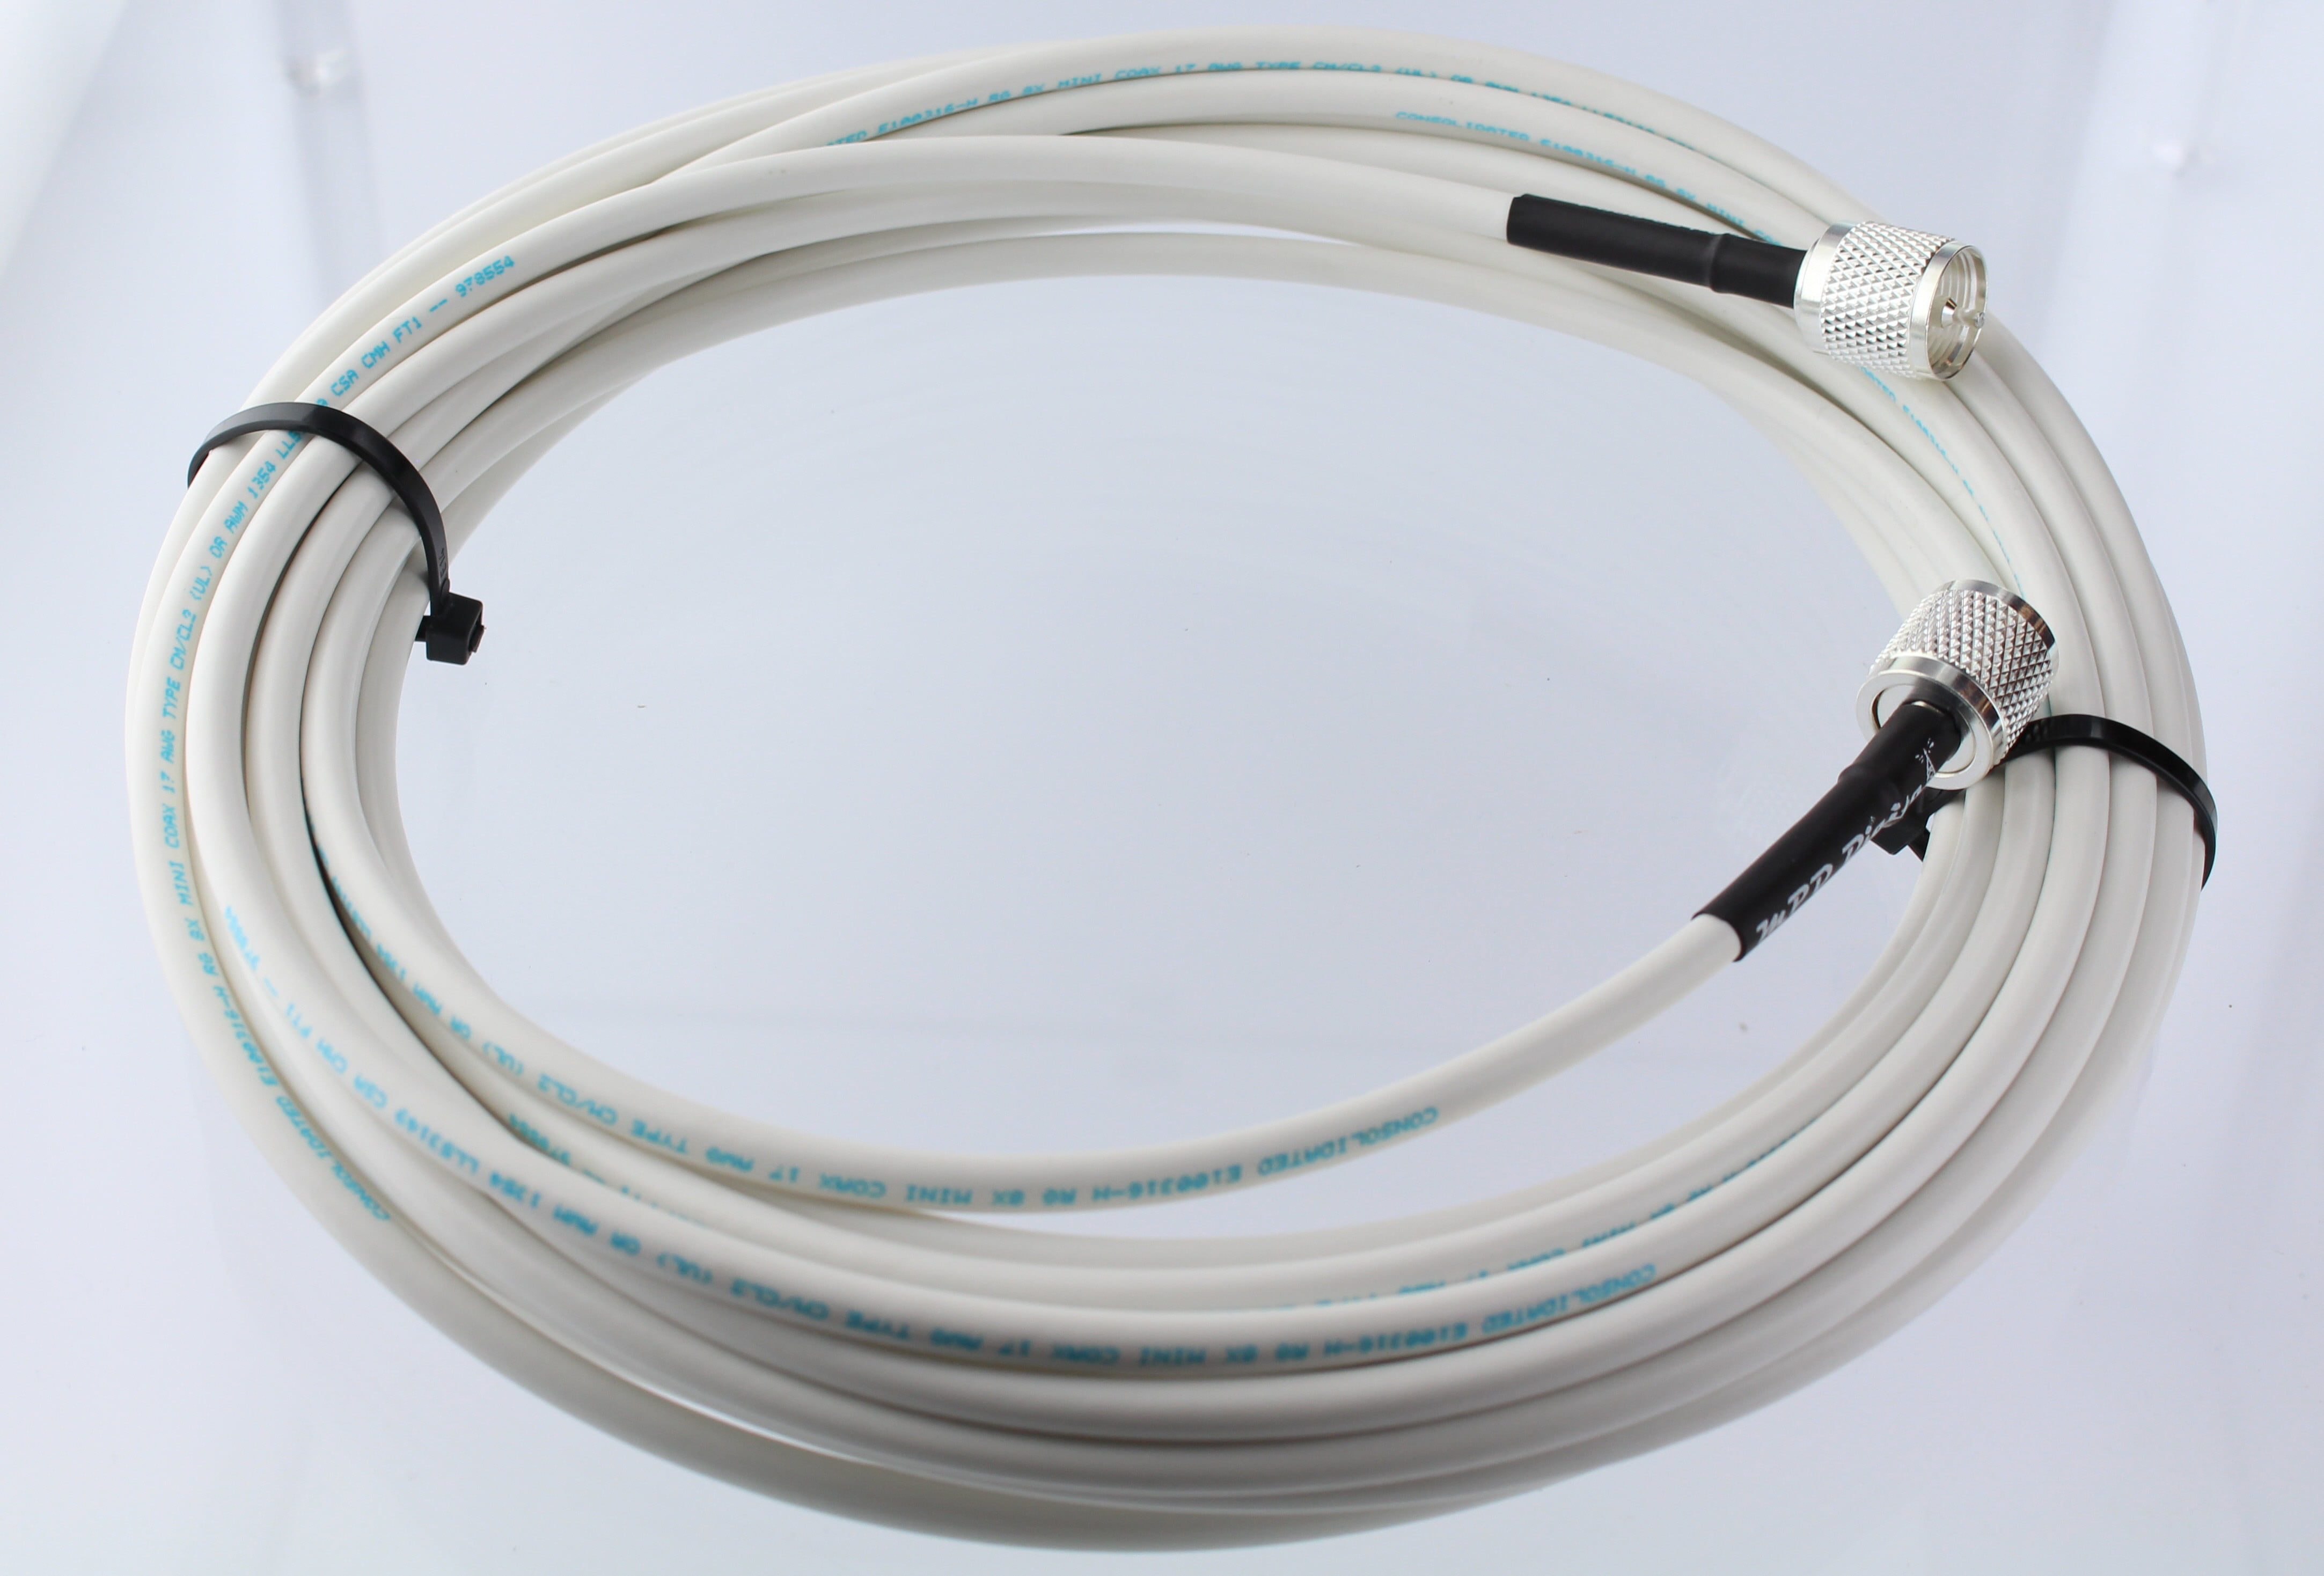 35 Feet VHF Marine Radio Antenna Cable RF CB and AIS Mini-8 Coaxial Antenna Cable PL-259 RG8x-W-PL259-35ft MPD Digital Made in The U.S.A